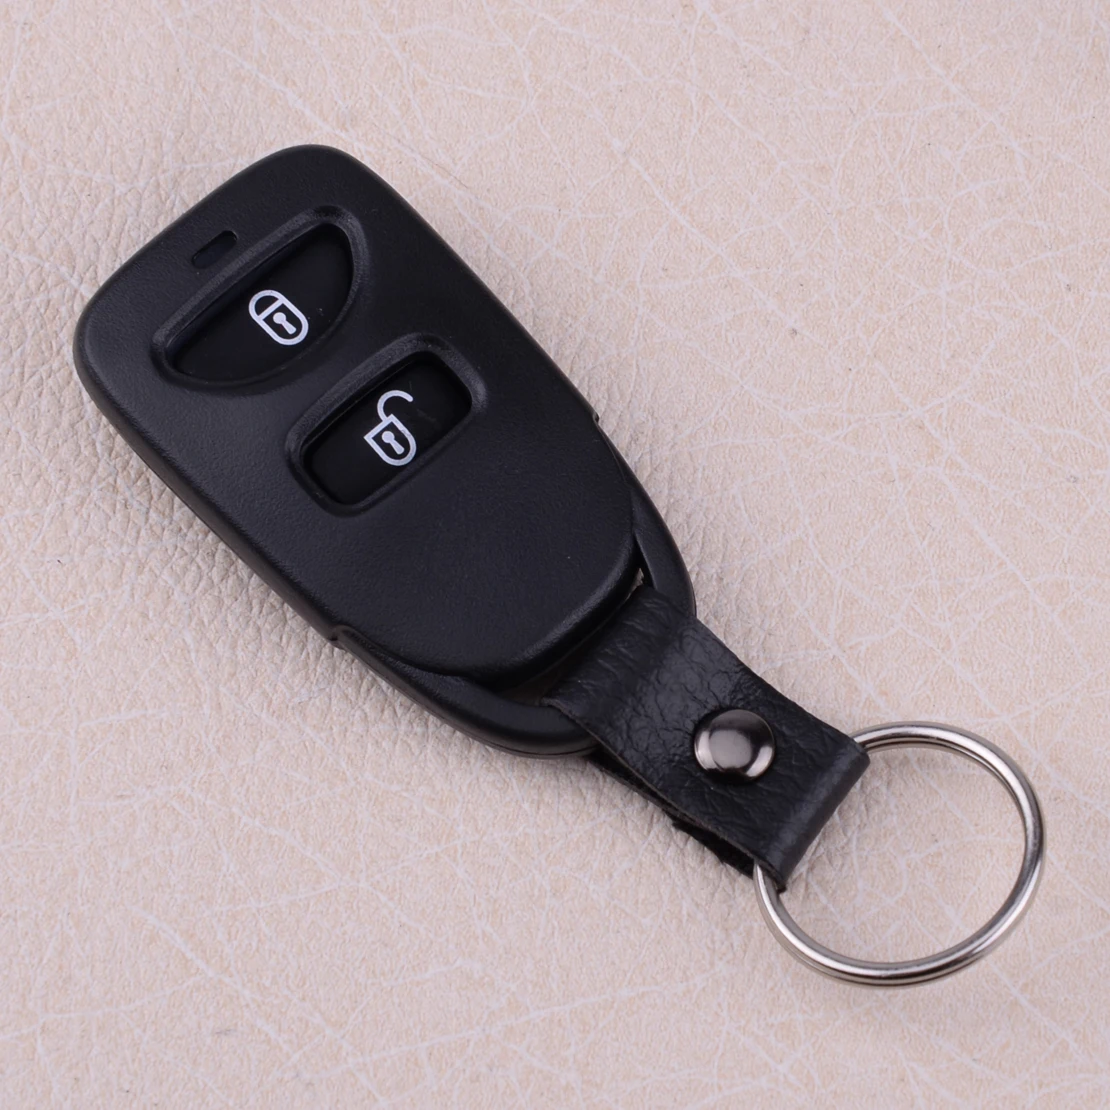 DWCX 2 Button Car Remote Key Shell Replacement Keyless Entry Fob Case Fit for KIA Sportage 2005 2006 2007 2008 2009 2010